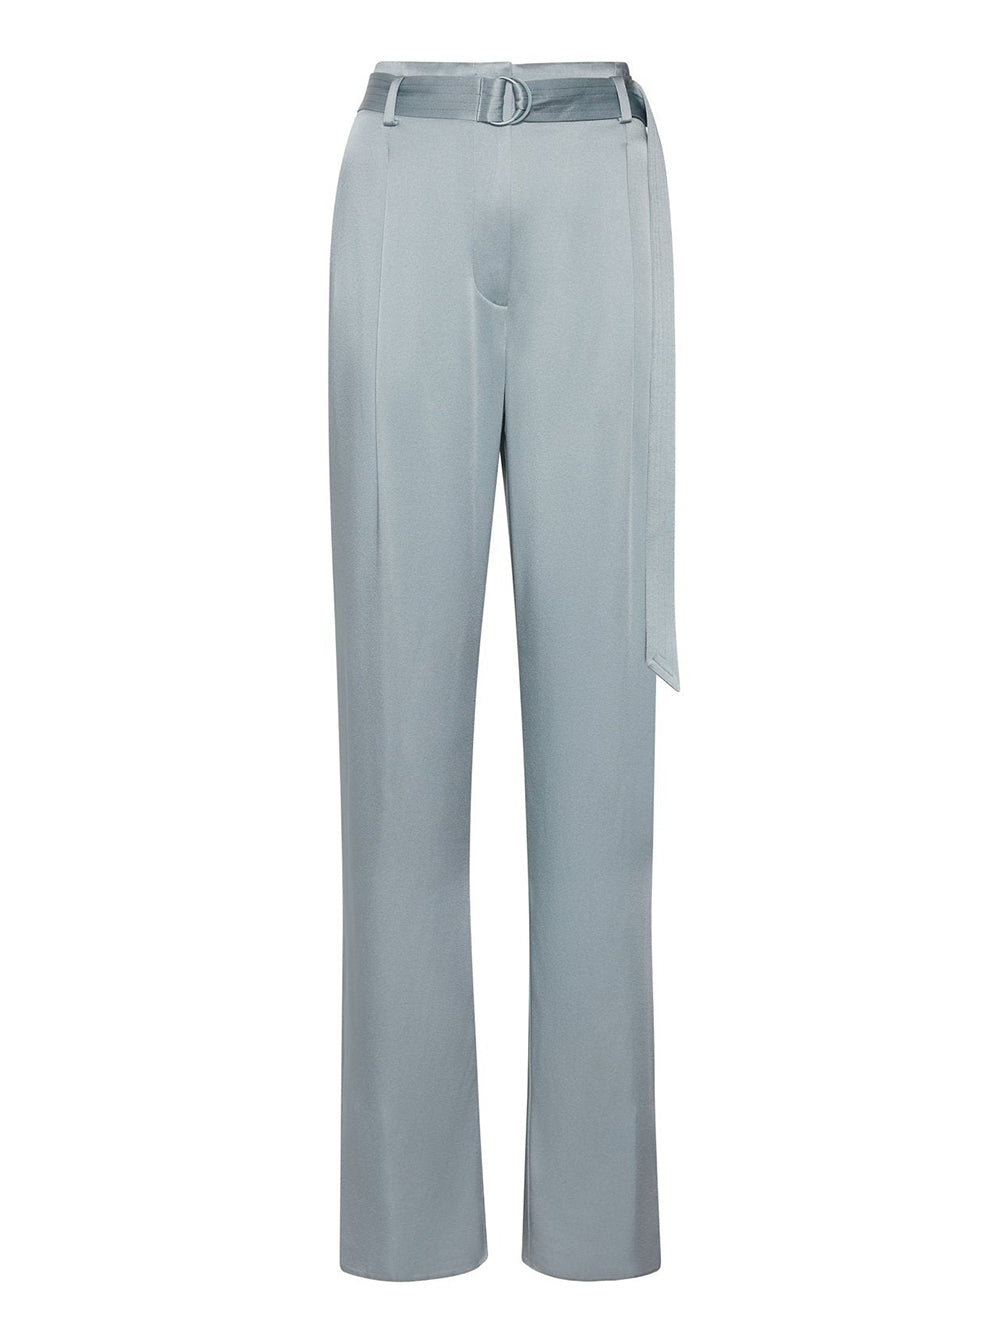 LaPointe Satin High-Waist Belted Pant in Dove